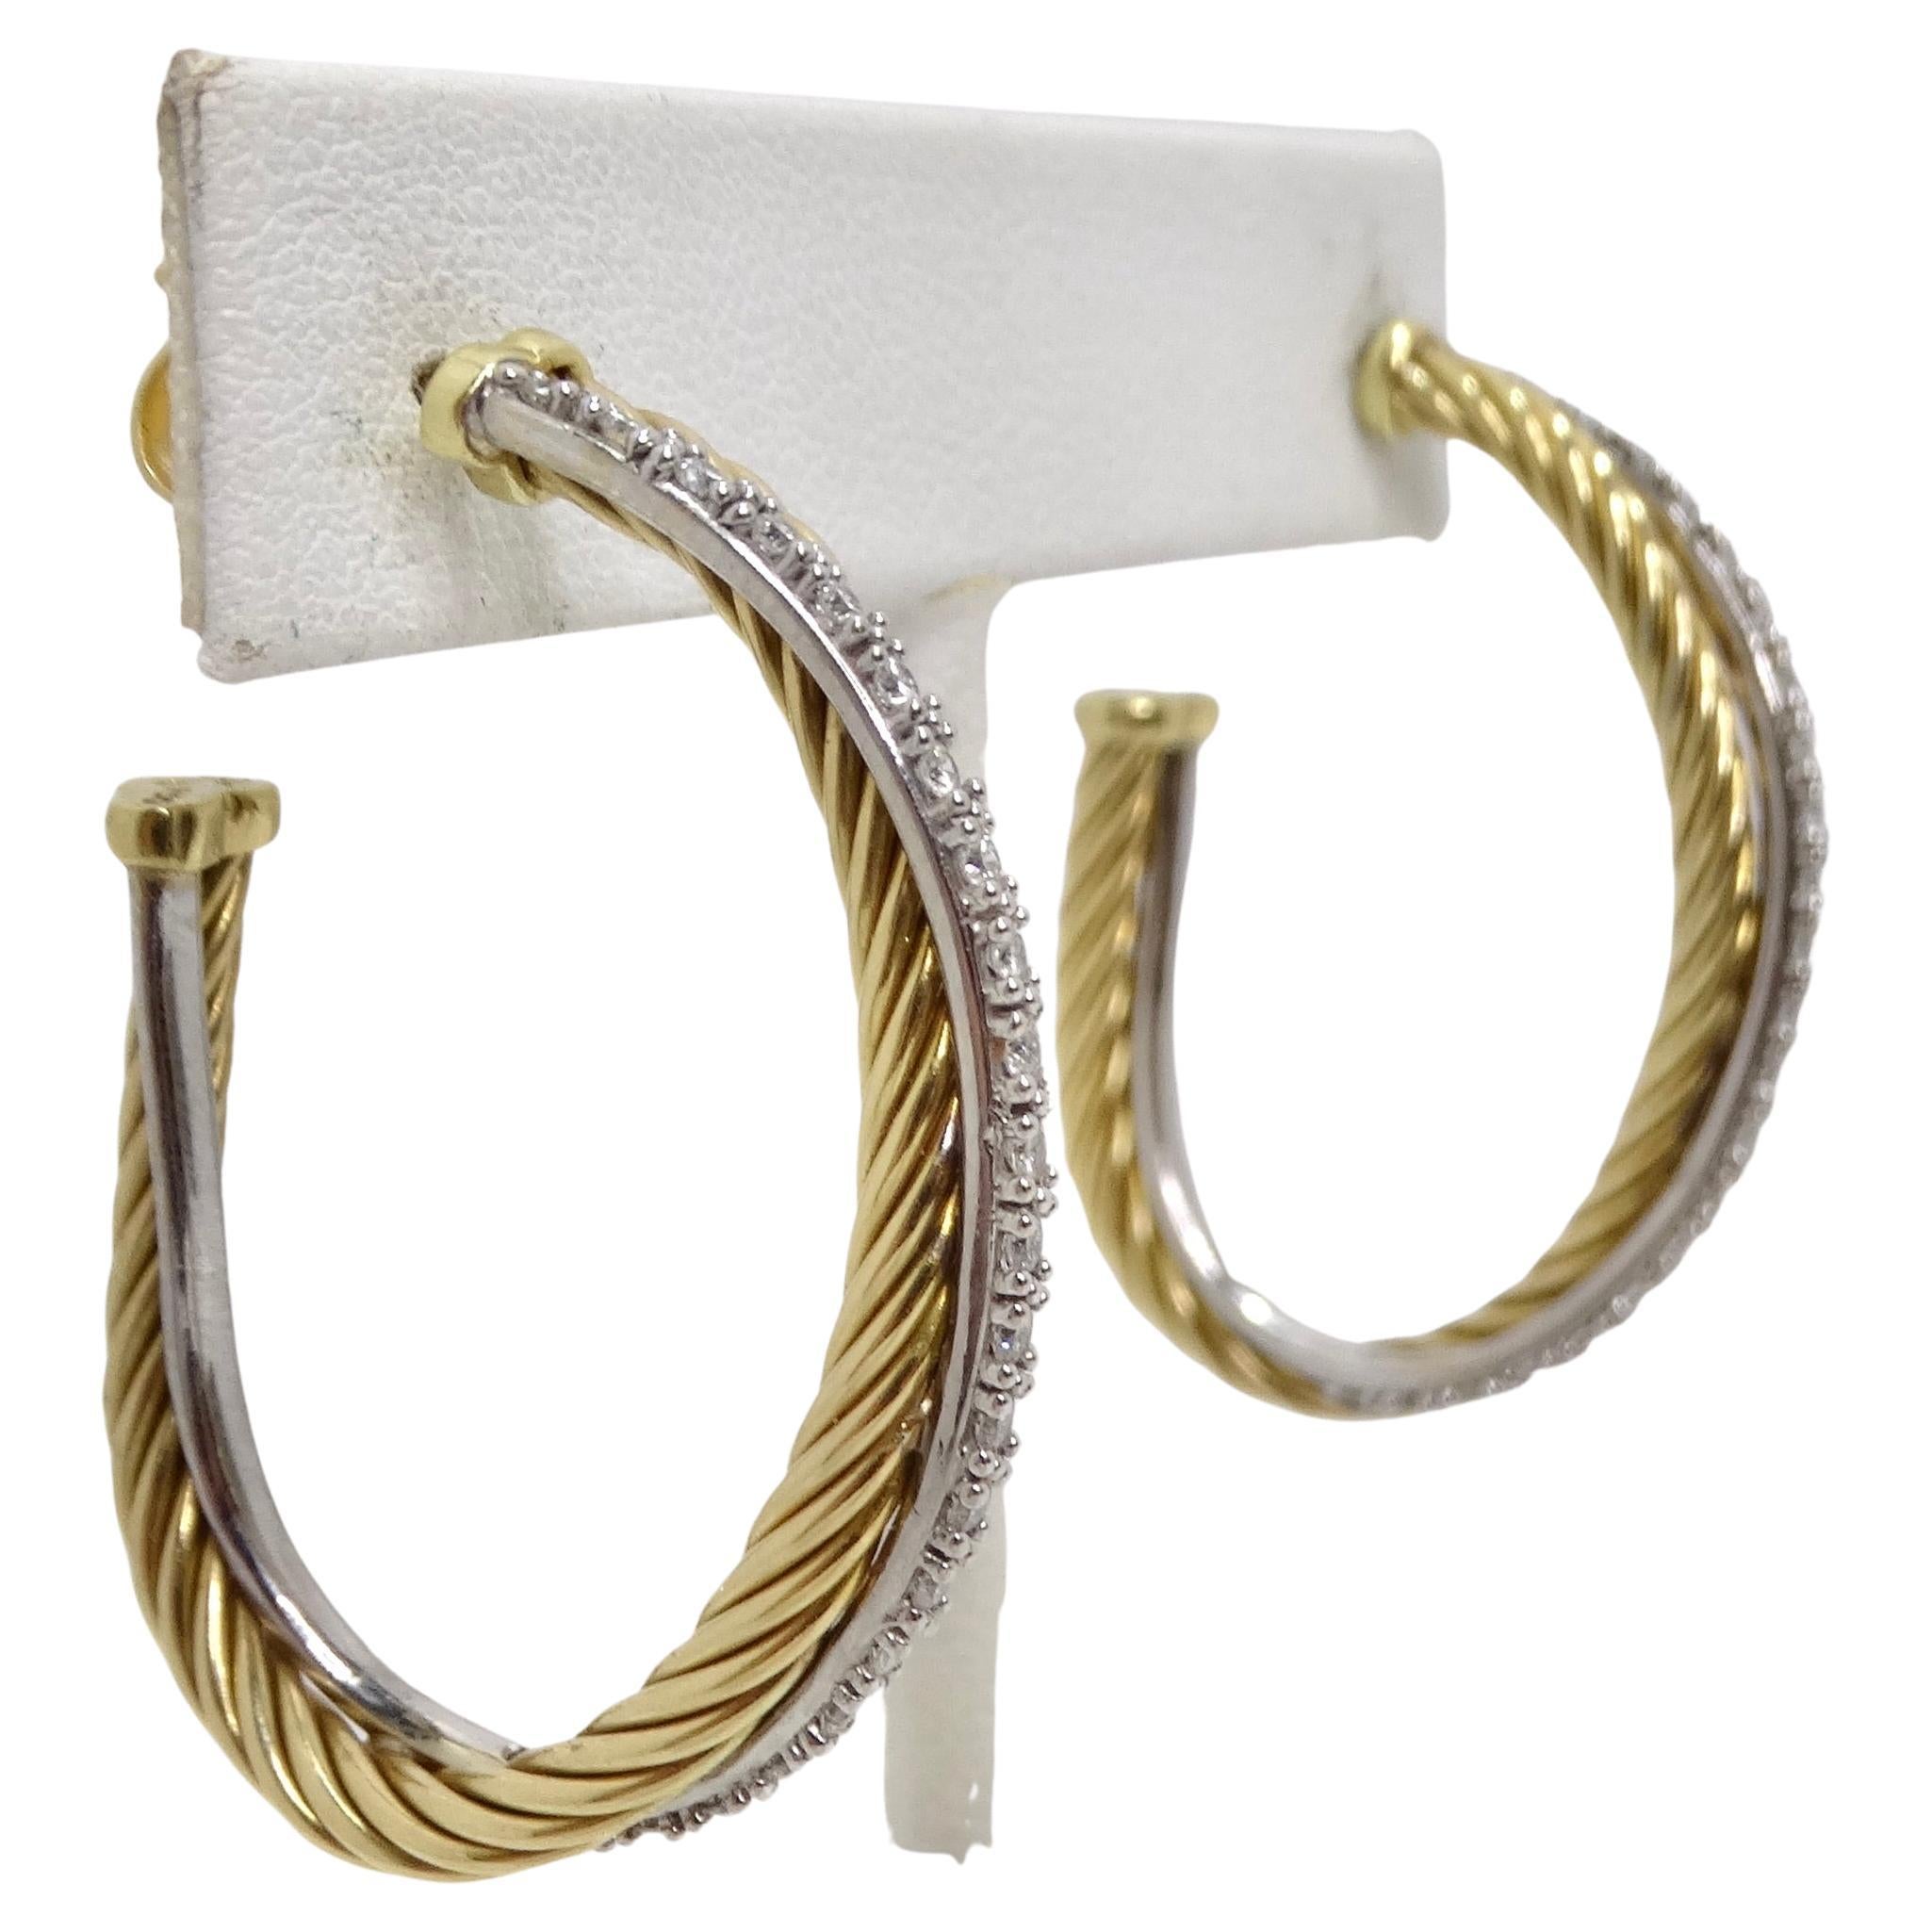 Indulge in pure luxury with these David Yurman Crossover XL Hoop Earrings in 18K Yellow Gold, adorned with sparkling diamonds. These gorgeous classic hoop earrings beautifully intertwine 18-karat yellow gold with dazzling diamonds. The David Yurman